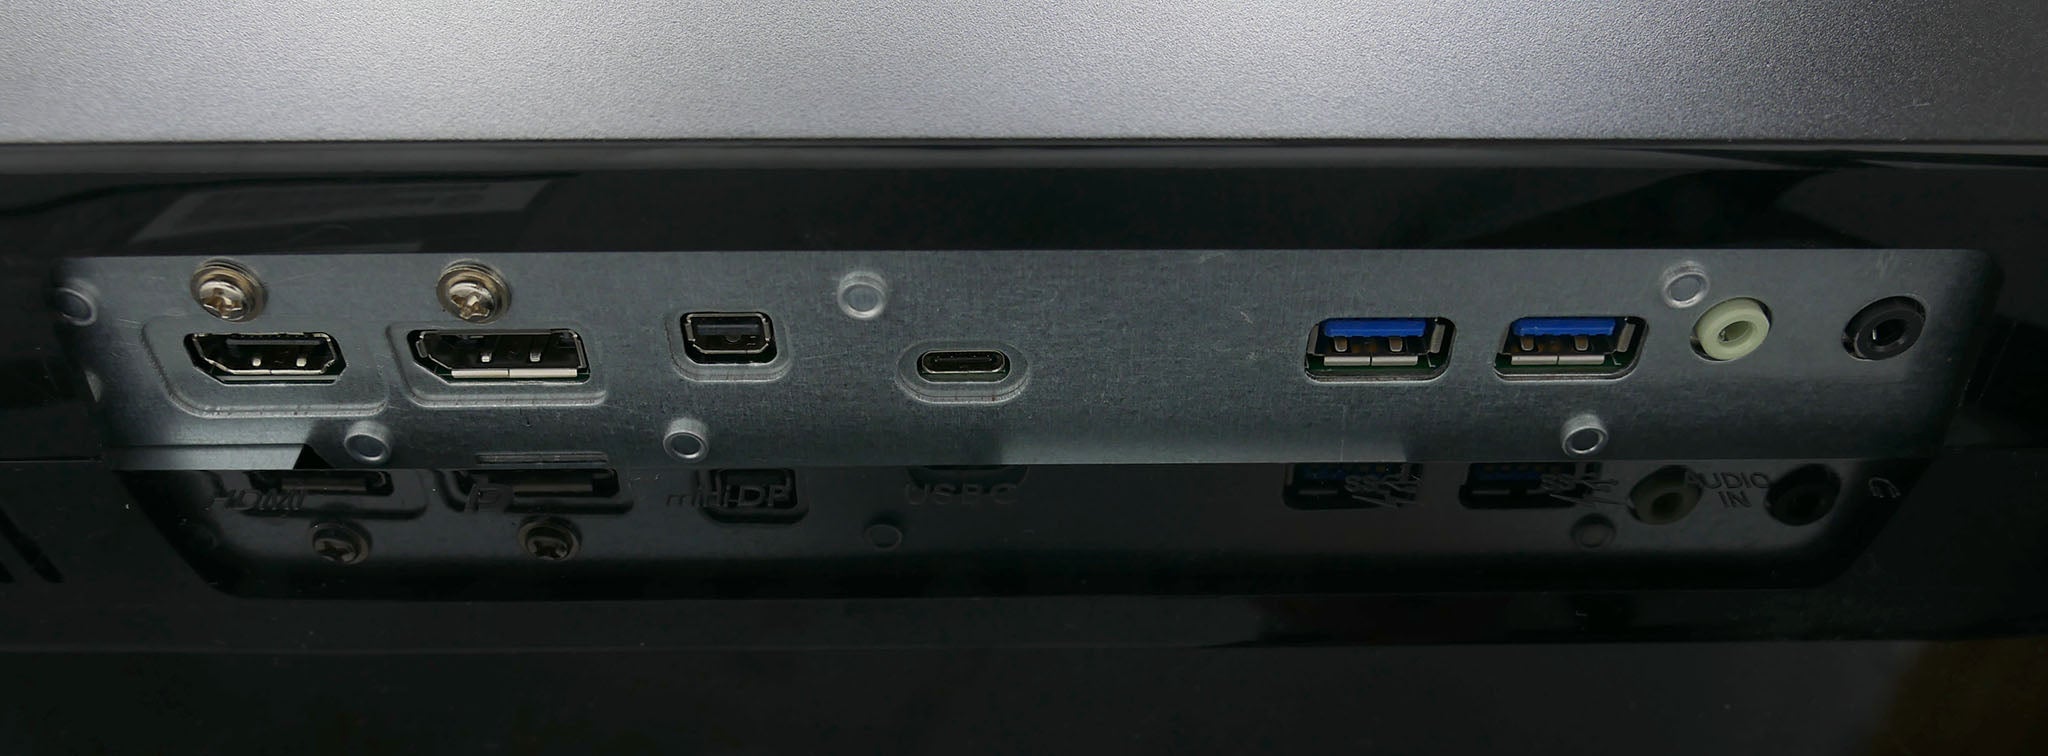 Close-up of Philips 436M6VBPAB monitor's connectivity ports.